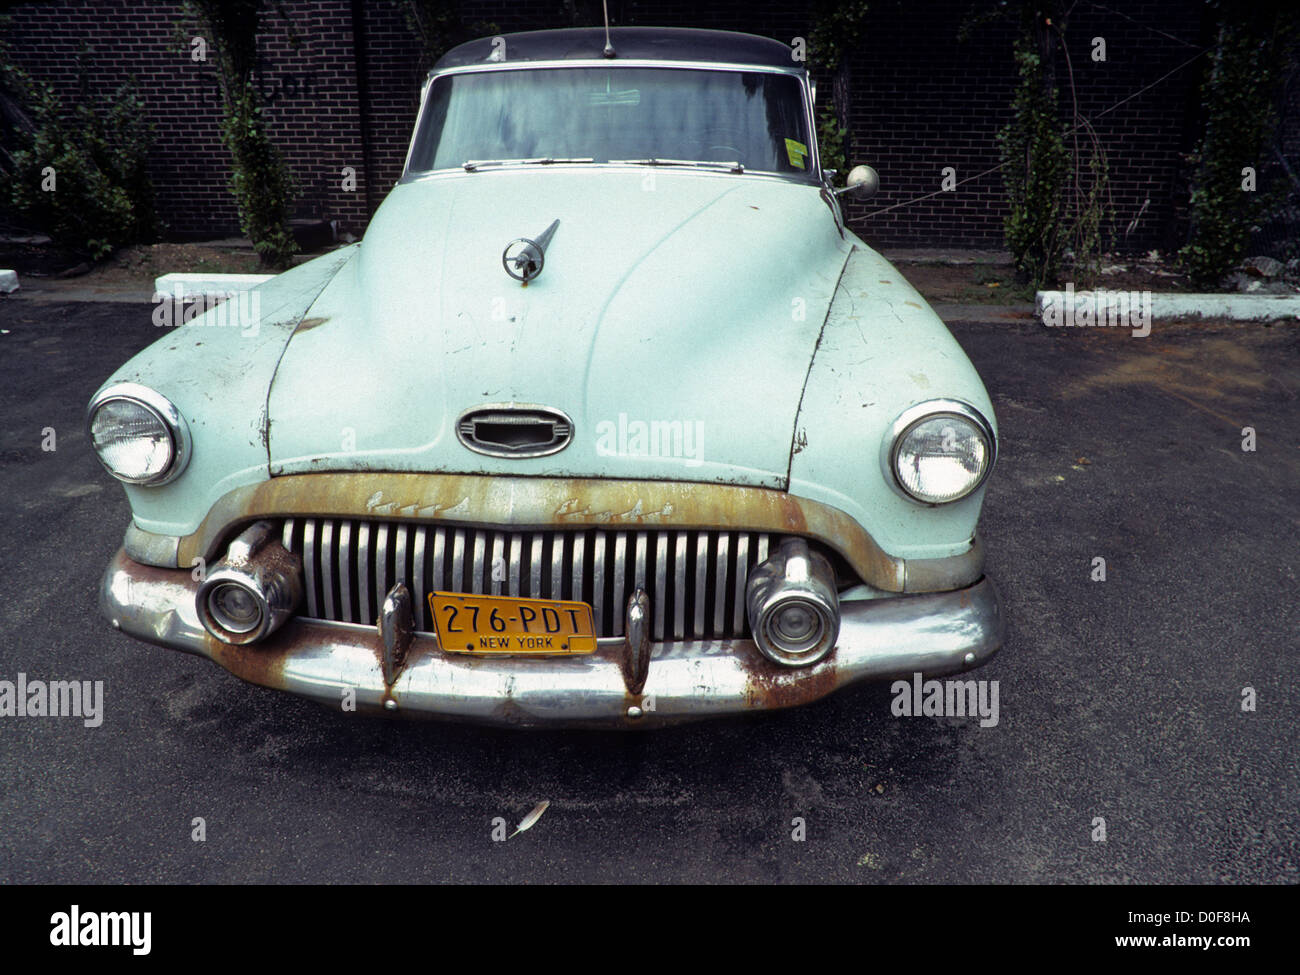 New York, NY -  May 1980 - Houston Street, rusty old circa 1950 Seafoam Green Buick Roadmaster automobile and a feather. Stock Photo